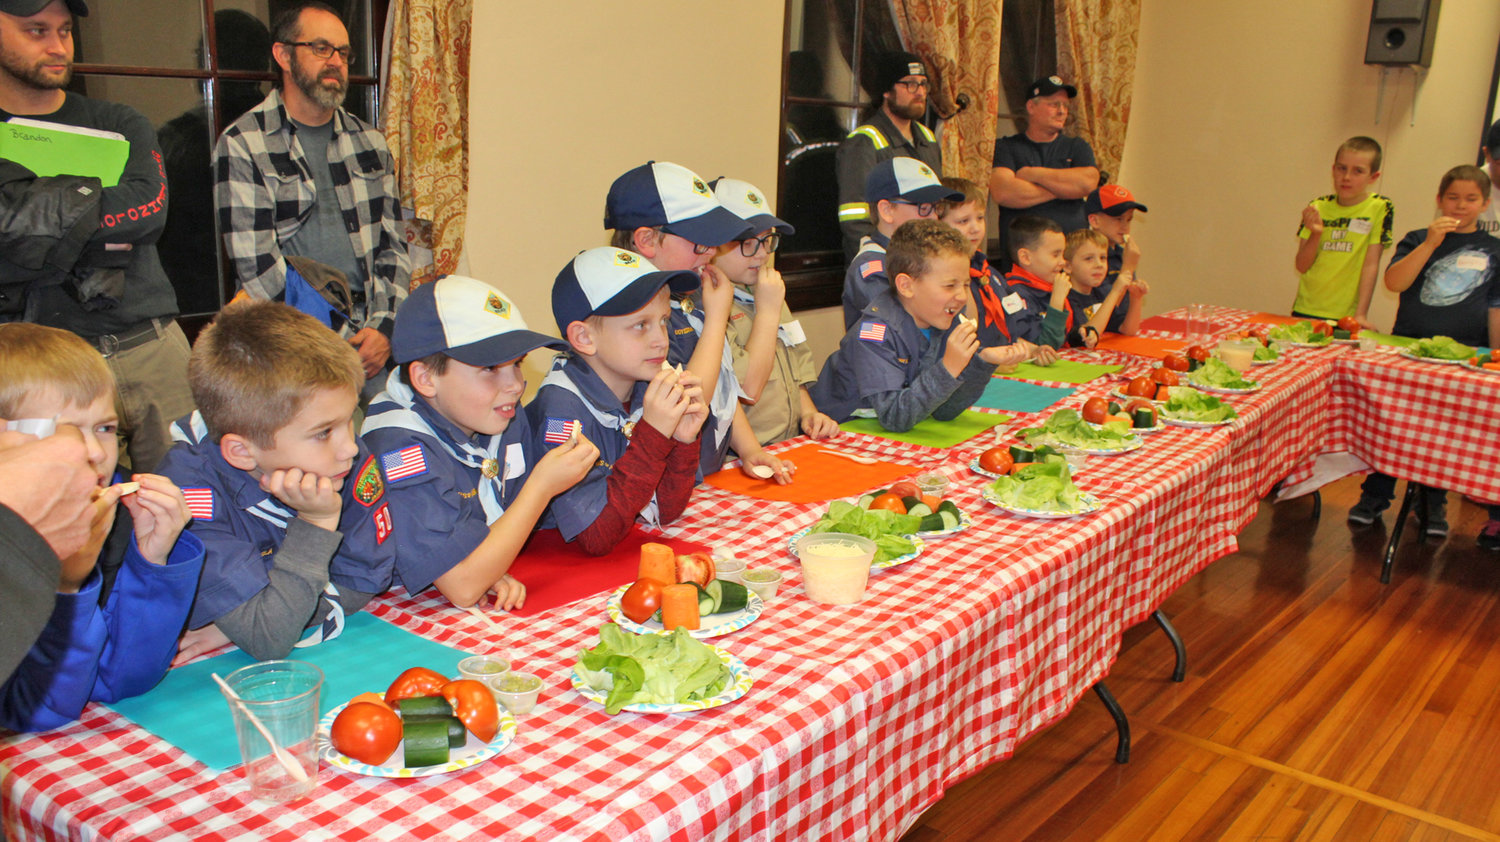 NOW THAT’S GOOD — Members of Boy Scouts Pack 50 of Rome taste star fruit and a variety of vegetables during a demonstration conducted by Bon Appetit of Hamilton College.